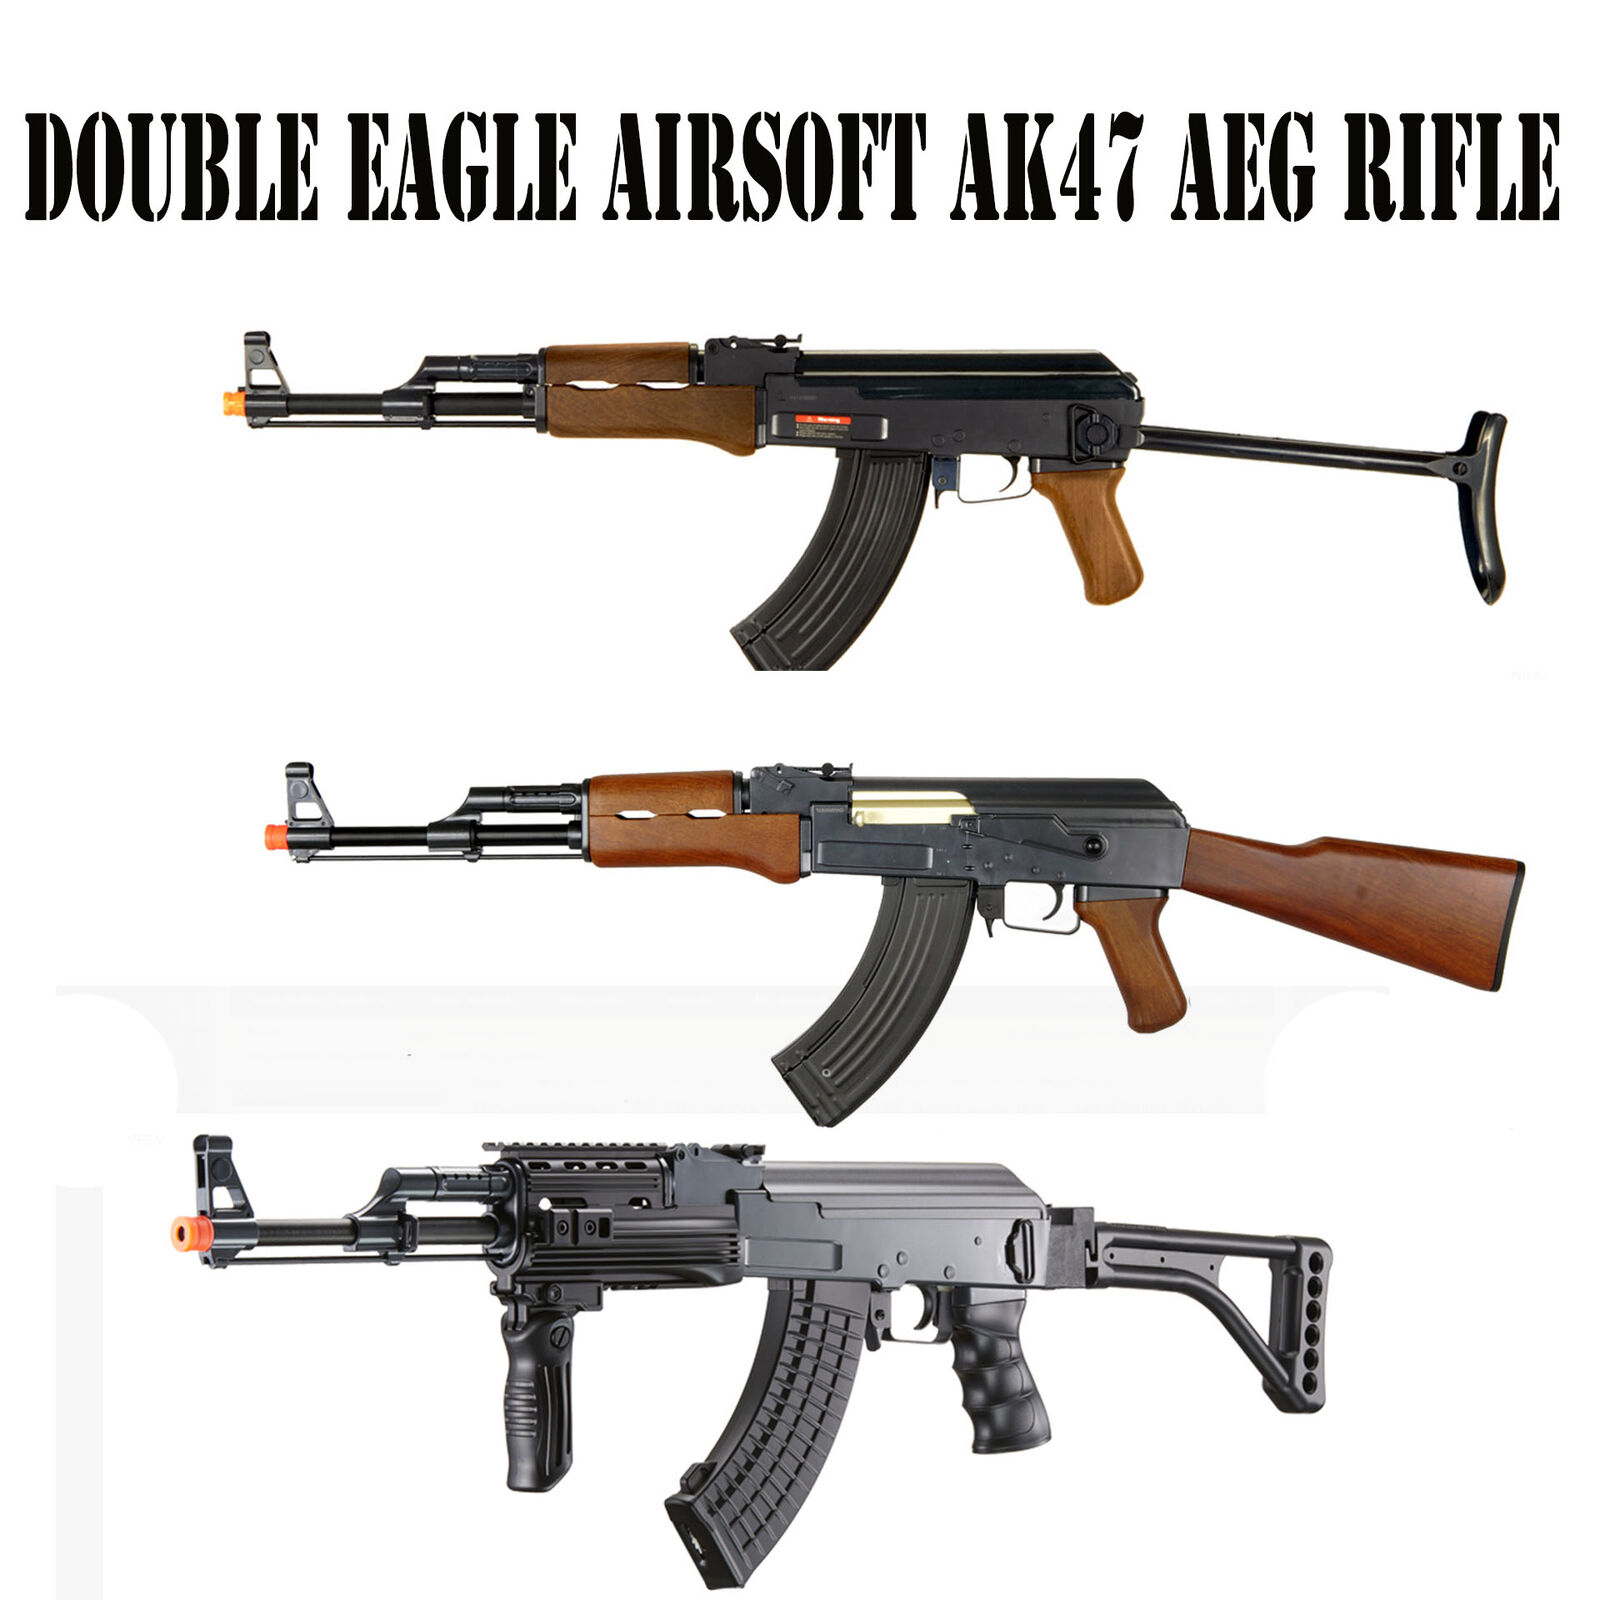  Double Eagle Metal AK 47 Realistic Feeling Airsoft Gun  Collectible Quality Full Auto Electric Rifle AEG Air Gun, Wood Color :  Sports & Outdoors